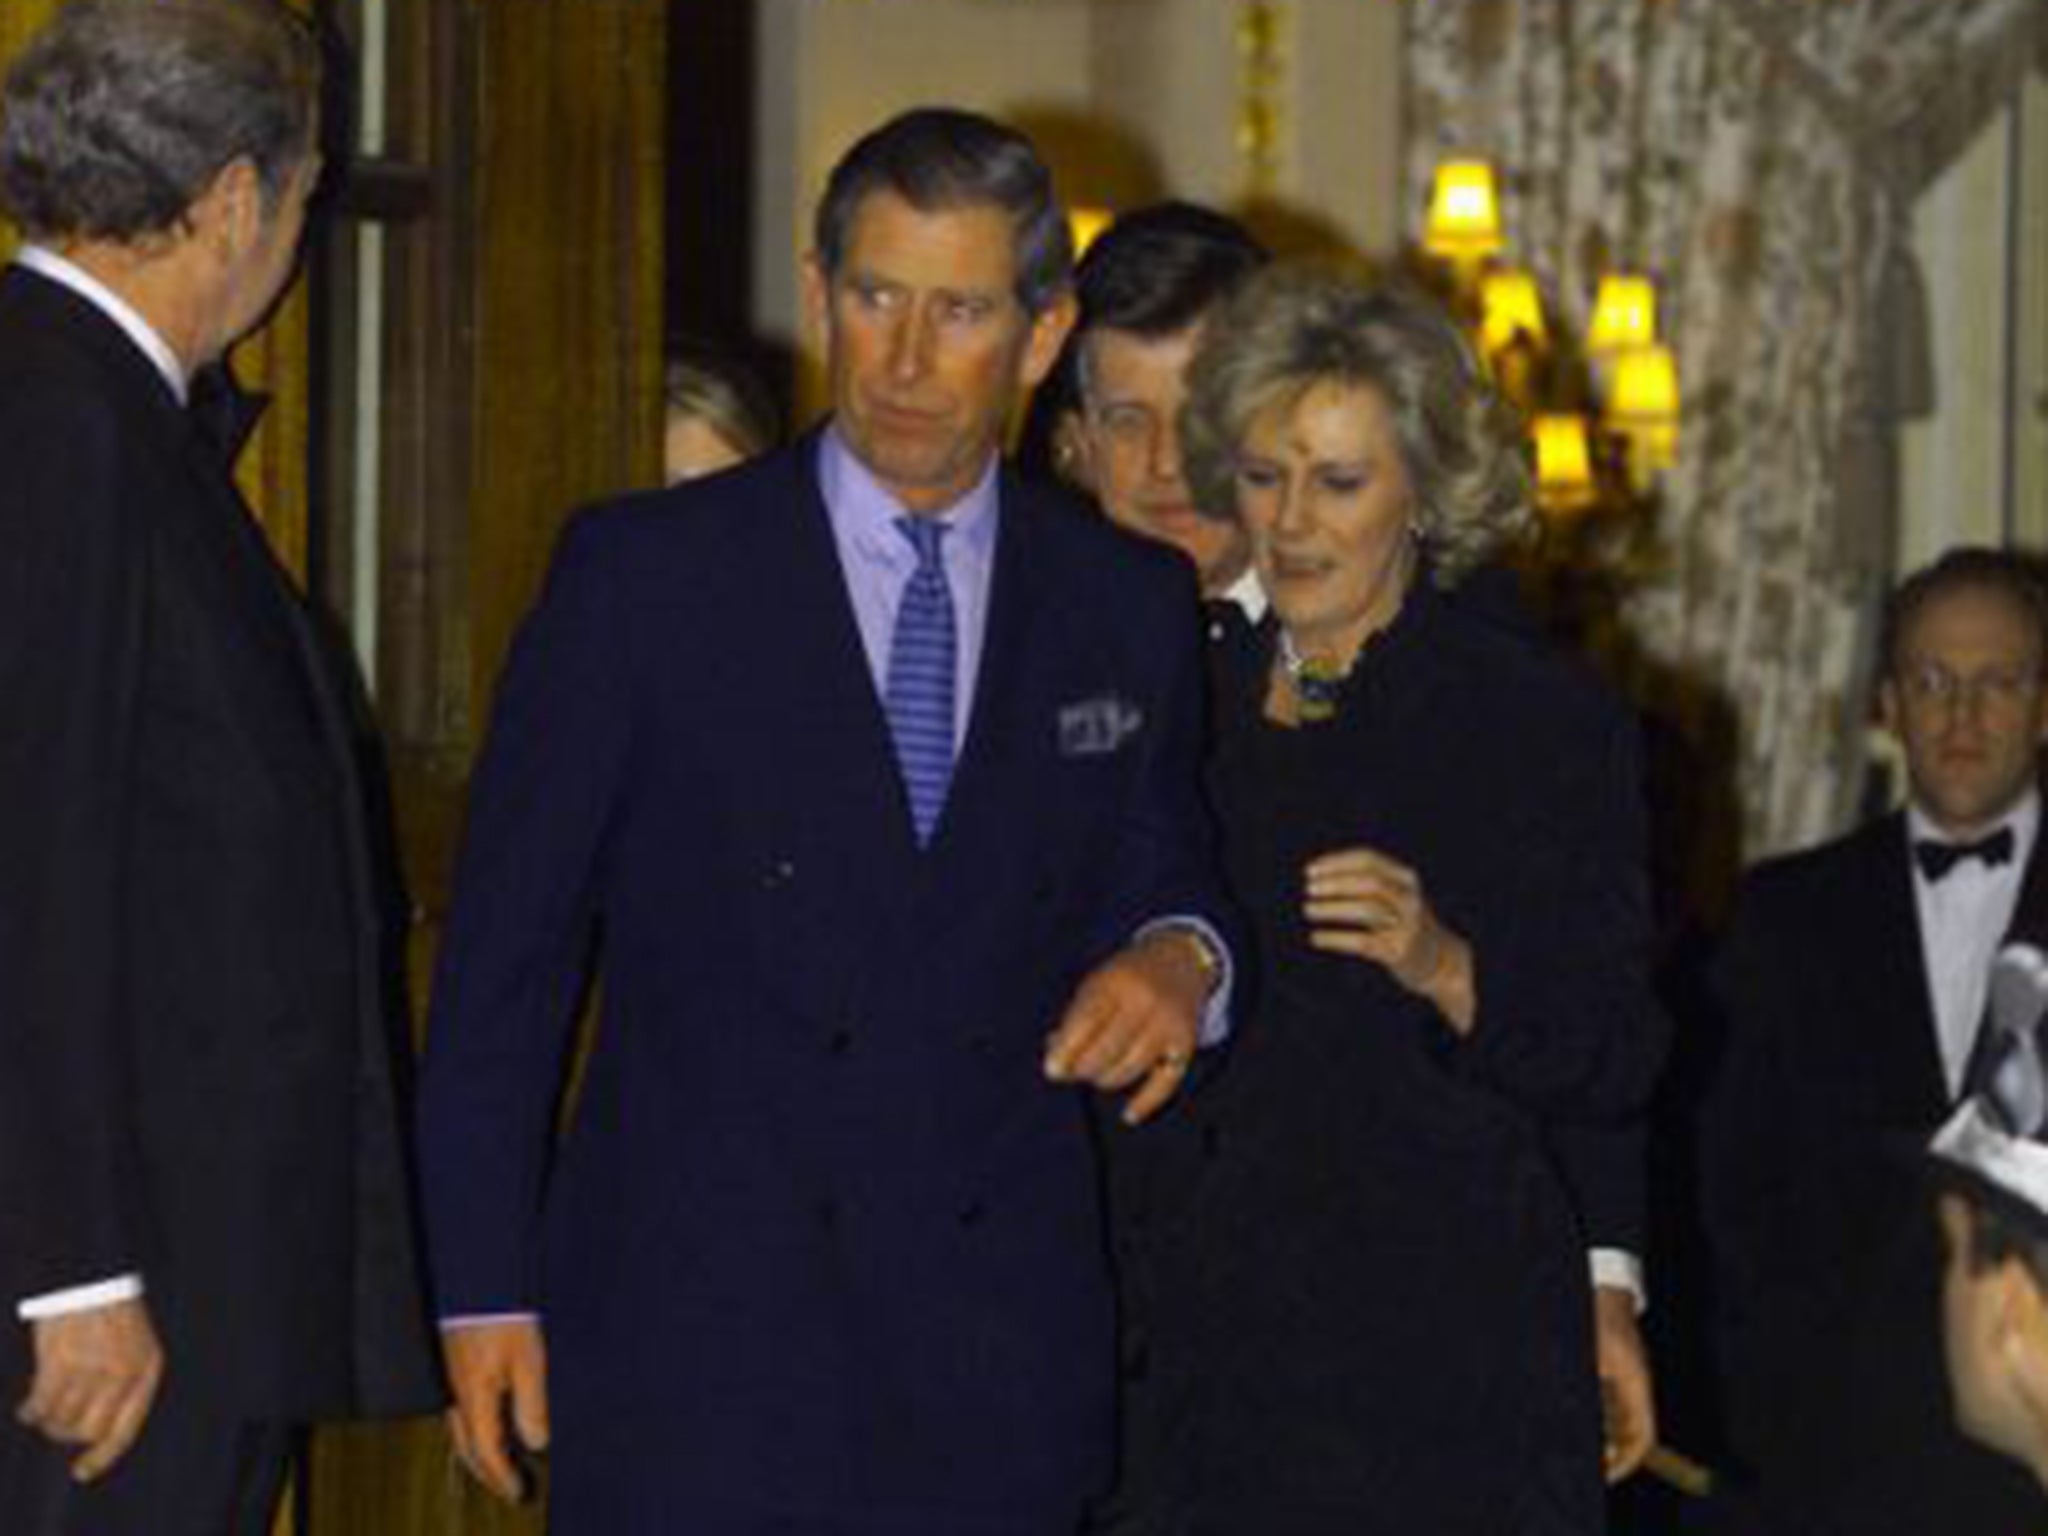 Prince Charles with Camilla Parker Bowles outside the Ritz Hotel in London in January 1999, at their first official public engagement together